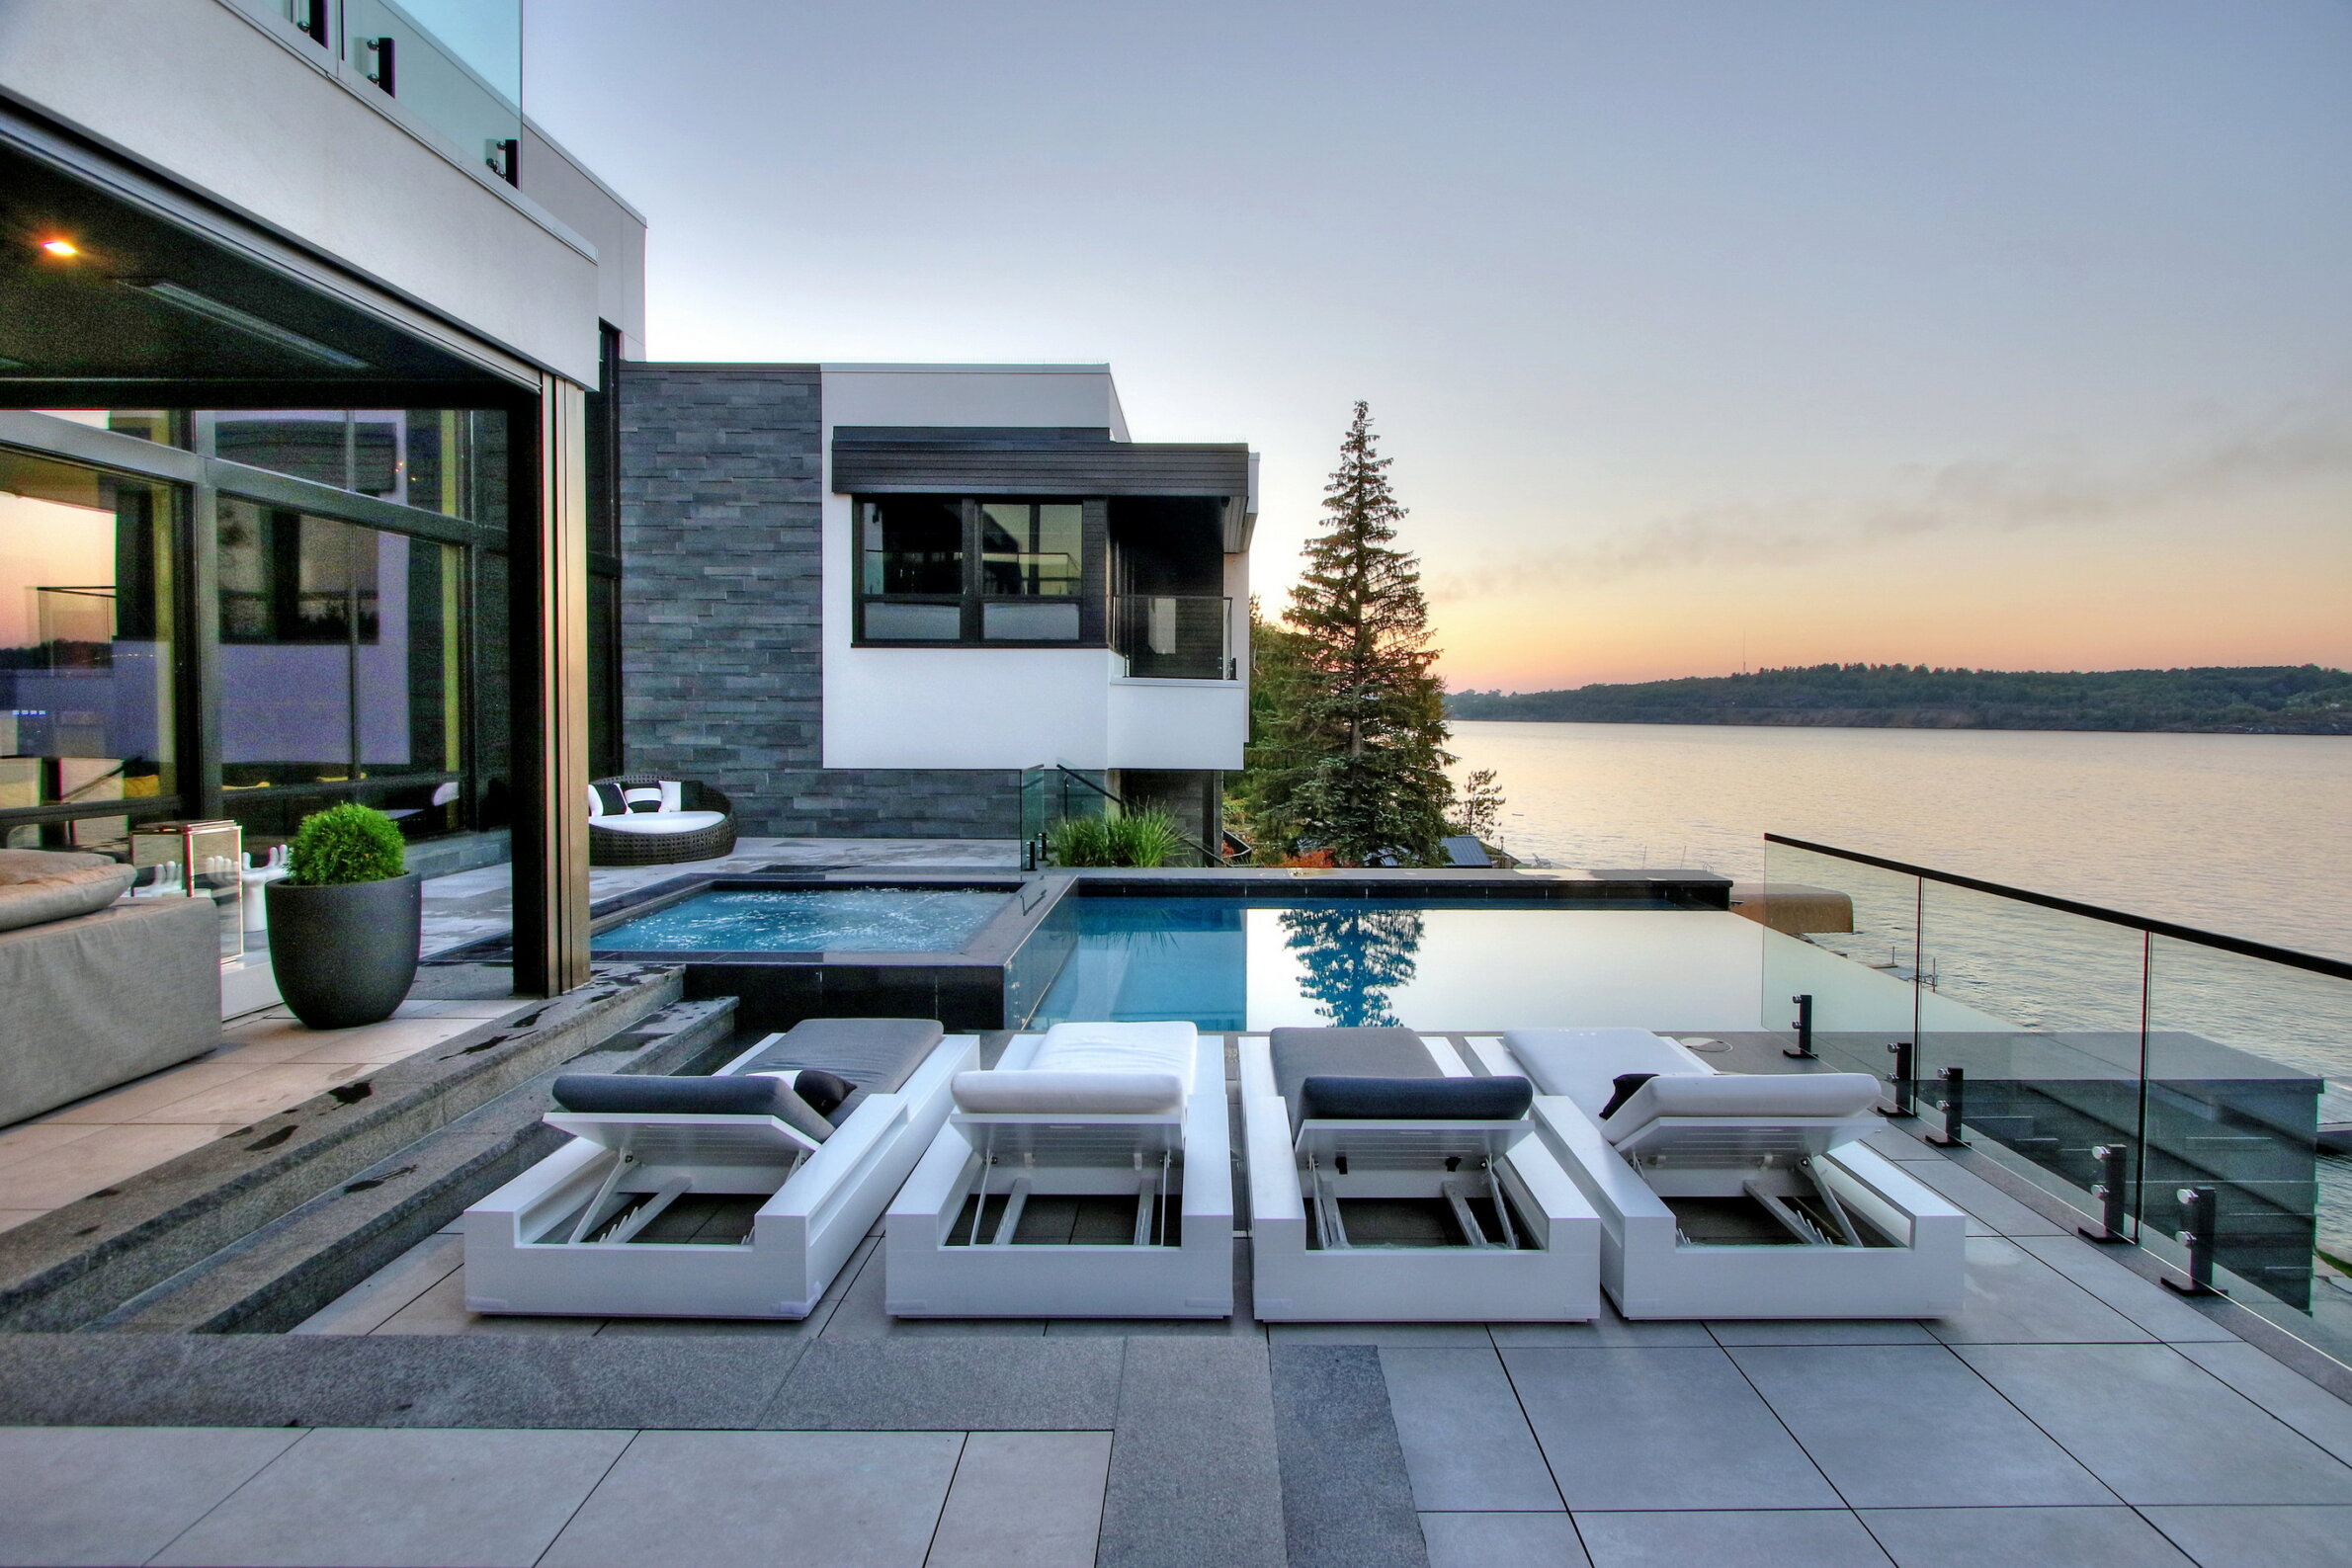 Modern house with infinity pool overlooking a tranquil body of water at dusk. The terrace includes lounge chairs and a seamless indoor-outdoor living space.